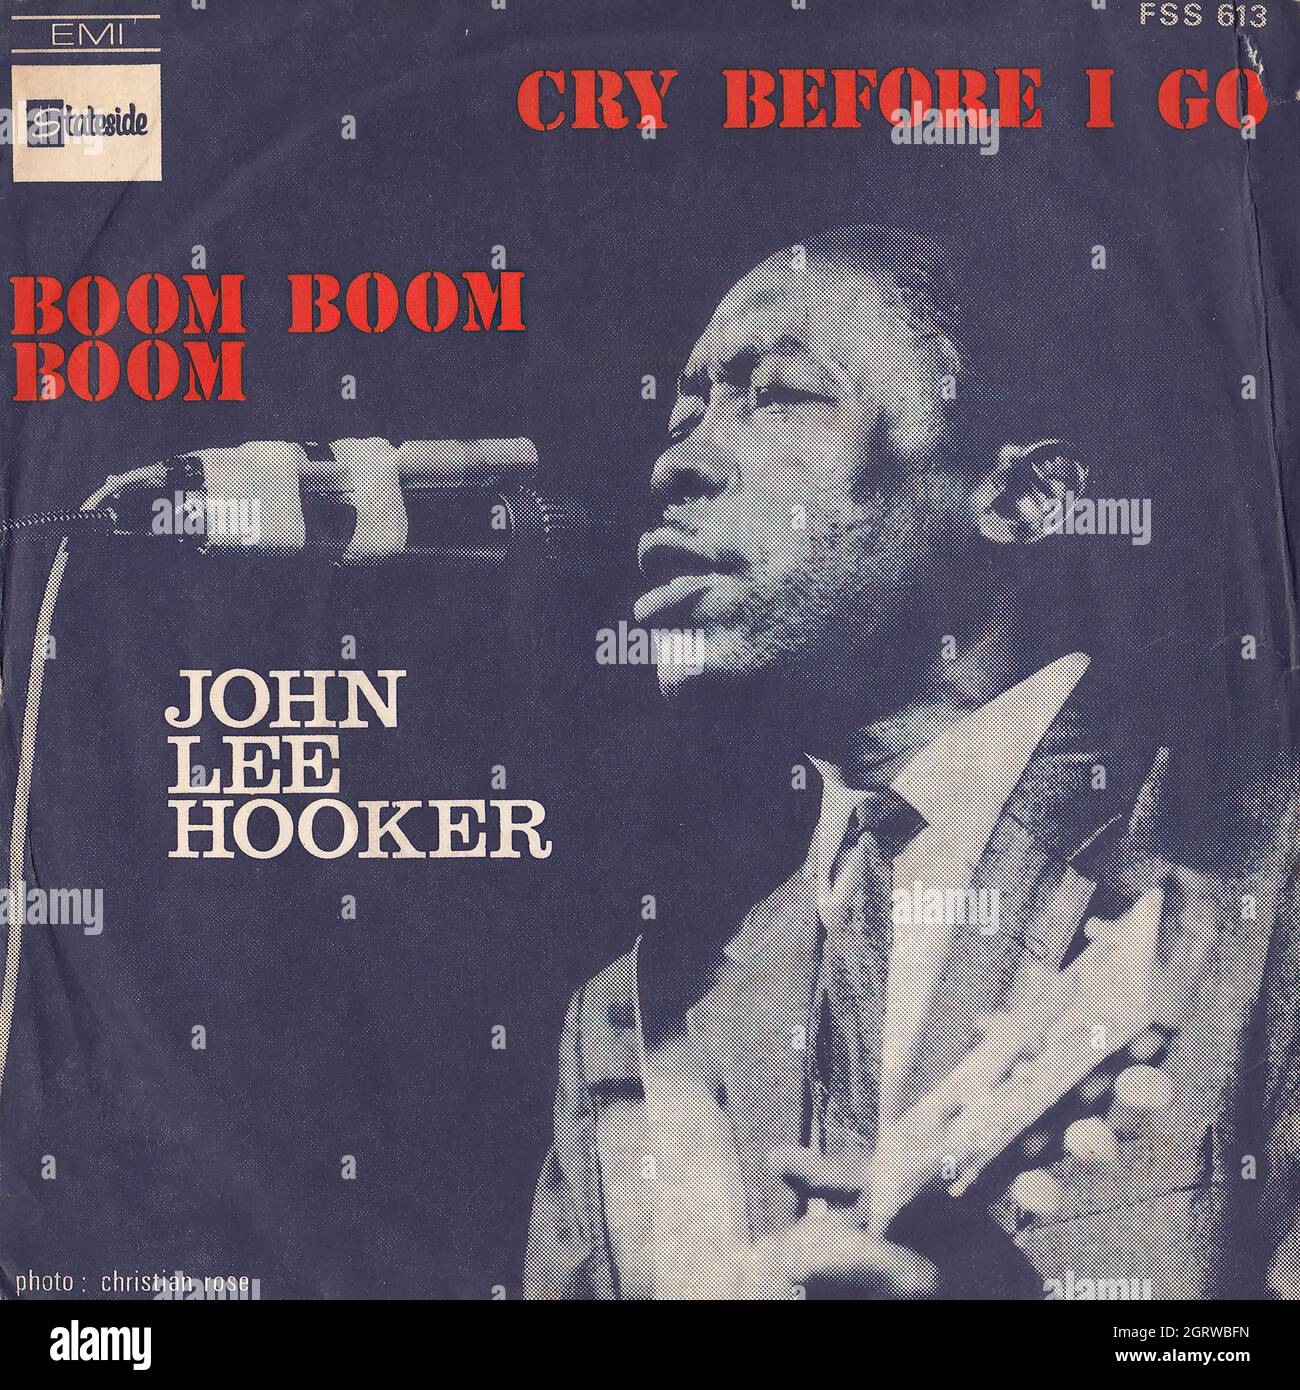 John Lee Hooker - Boom boom boom - Cry before i go 45rpm - Vintage Vinyl  Record Cover Stock Photo - Alamy